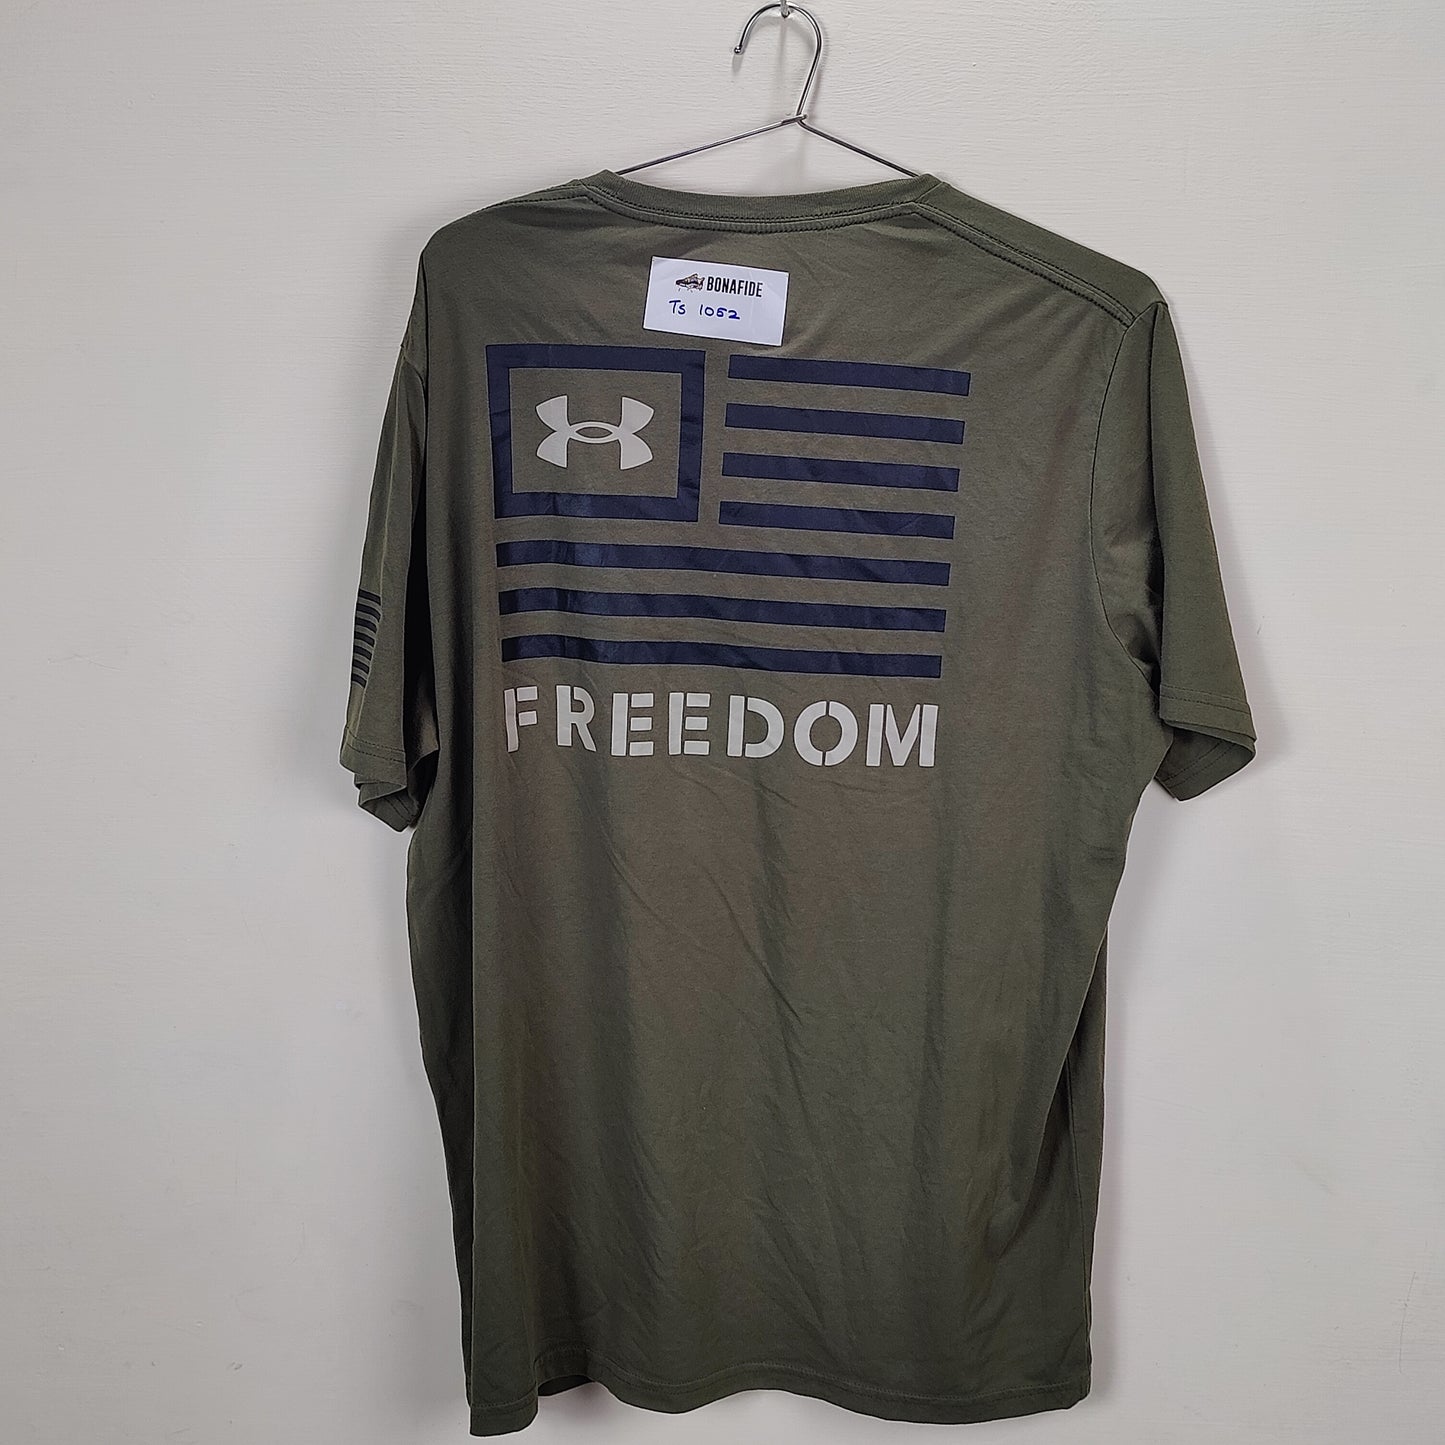 Under Armour Freedom - Green - TS1052